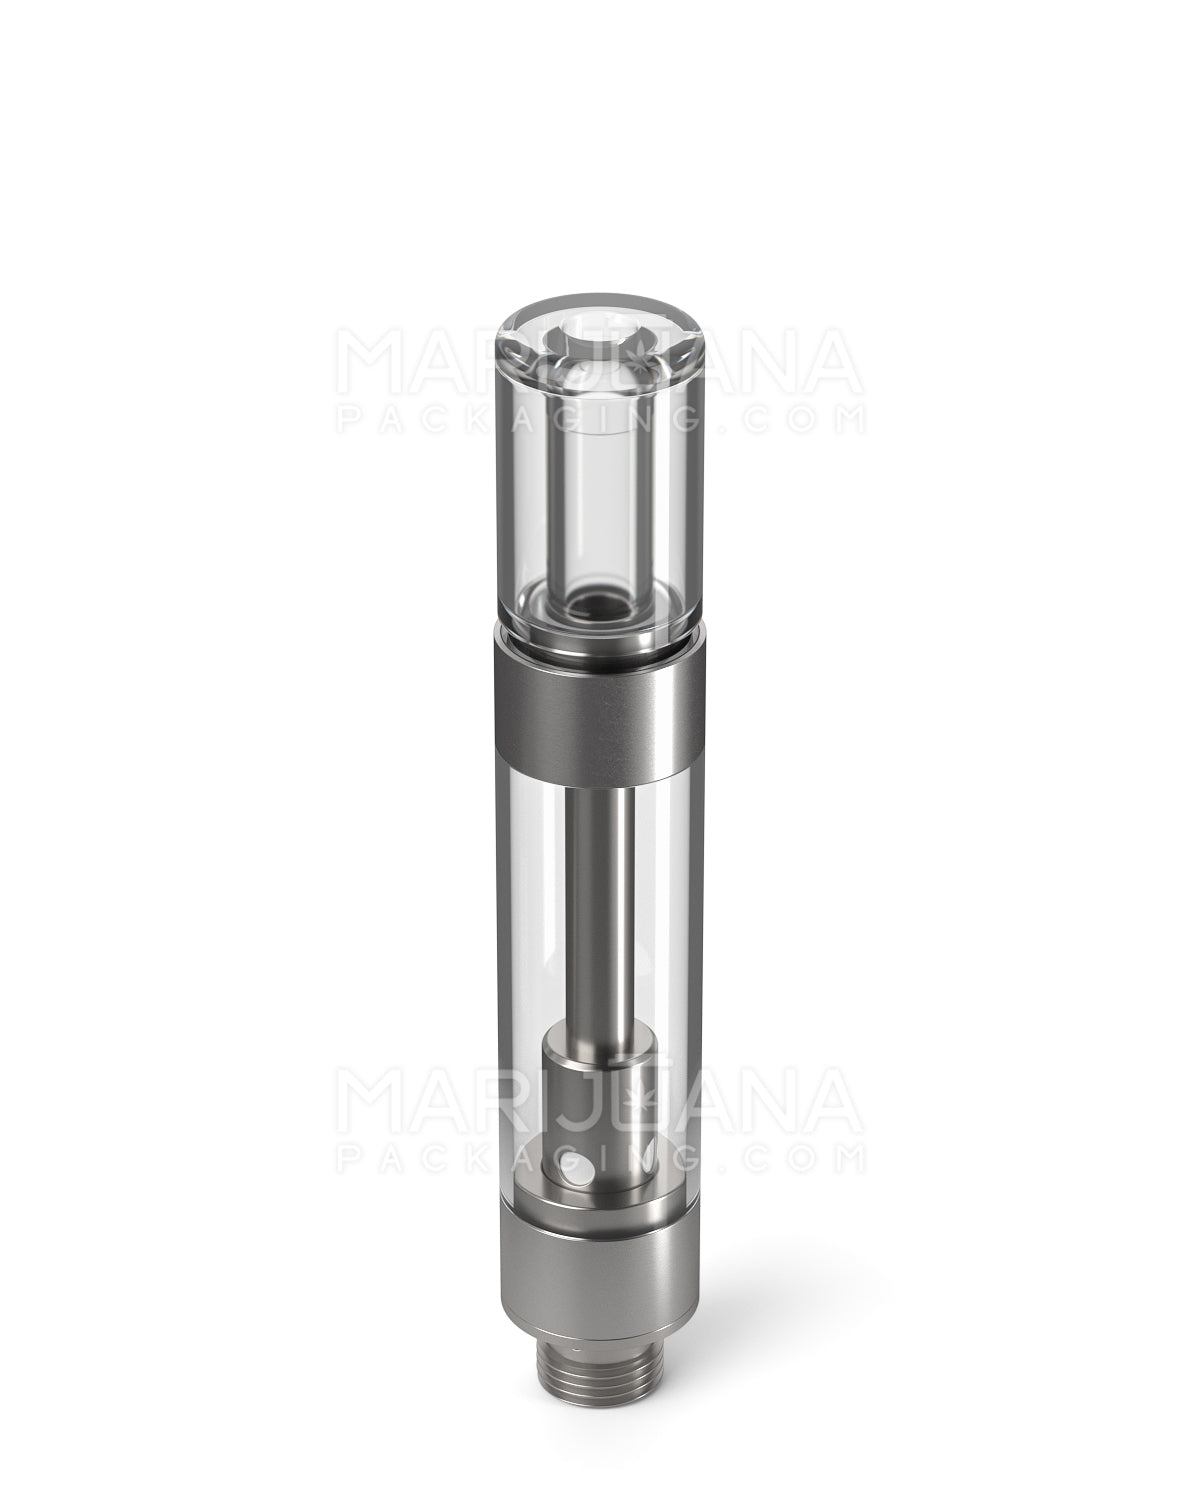 CCELL | Liquid6 Reactor Plastic Vape Cartridge with Barrel Clear Plastic Mouthpiece | 1mL - Press On - 100 Count - 4